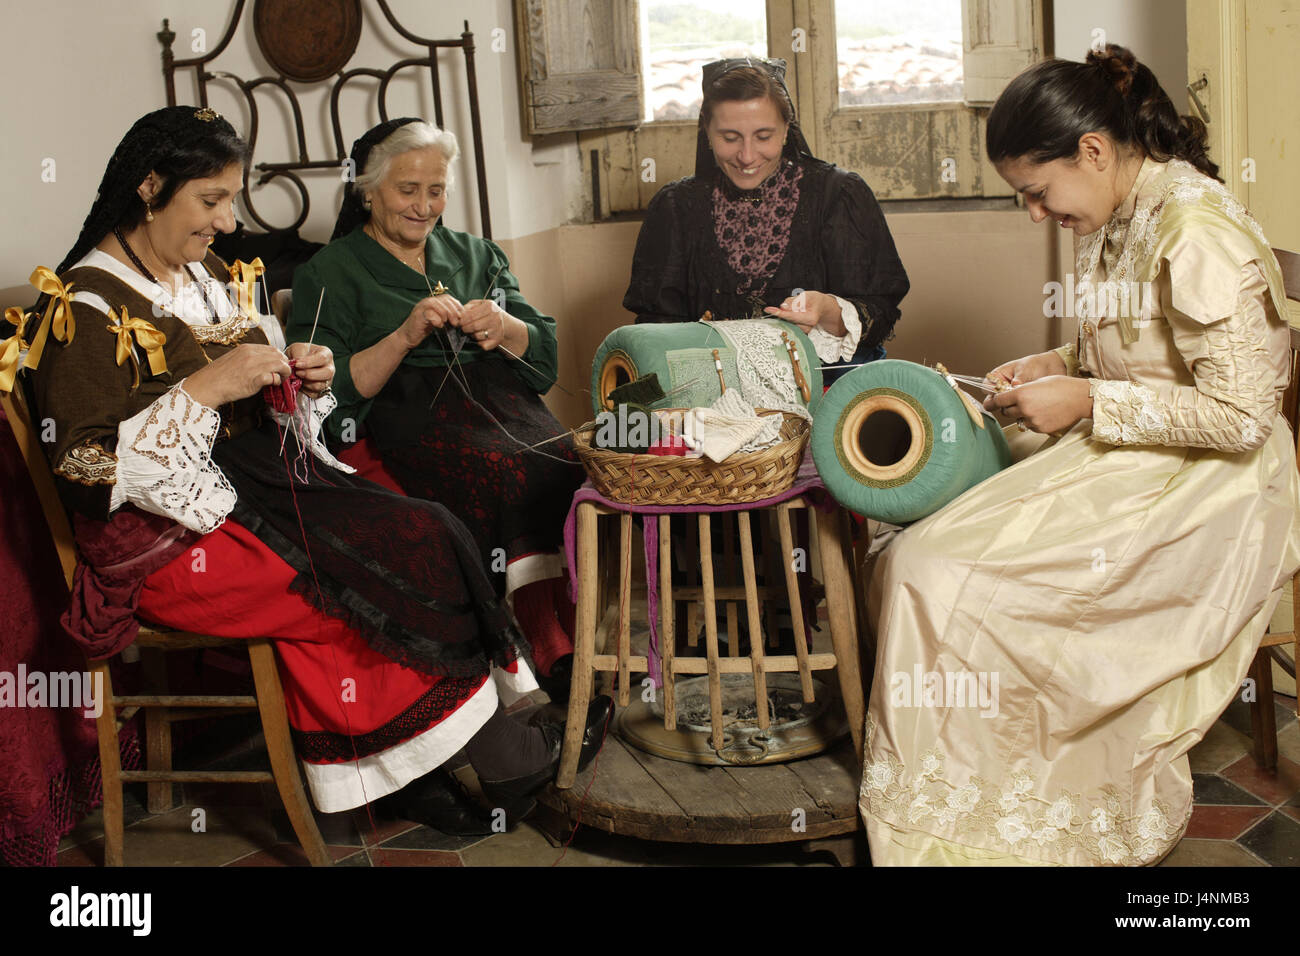 Italy, Calabria, Serrastretta, women, manual labours, together, Süditalien, people, senior citizens, seniors, national costume, folklore clothes, headgear, sit, manual labour, knitting, make lace, attach, craft art, work, occupation, tradition, inside, Stock Photo